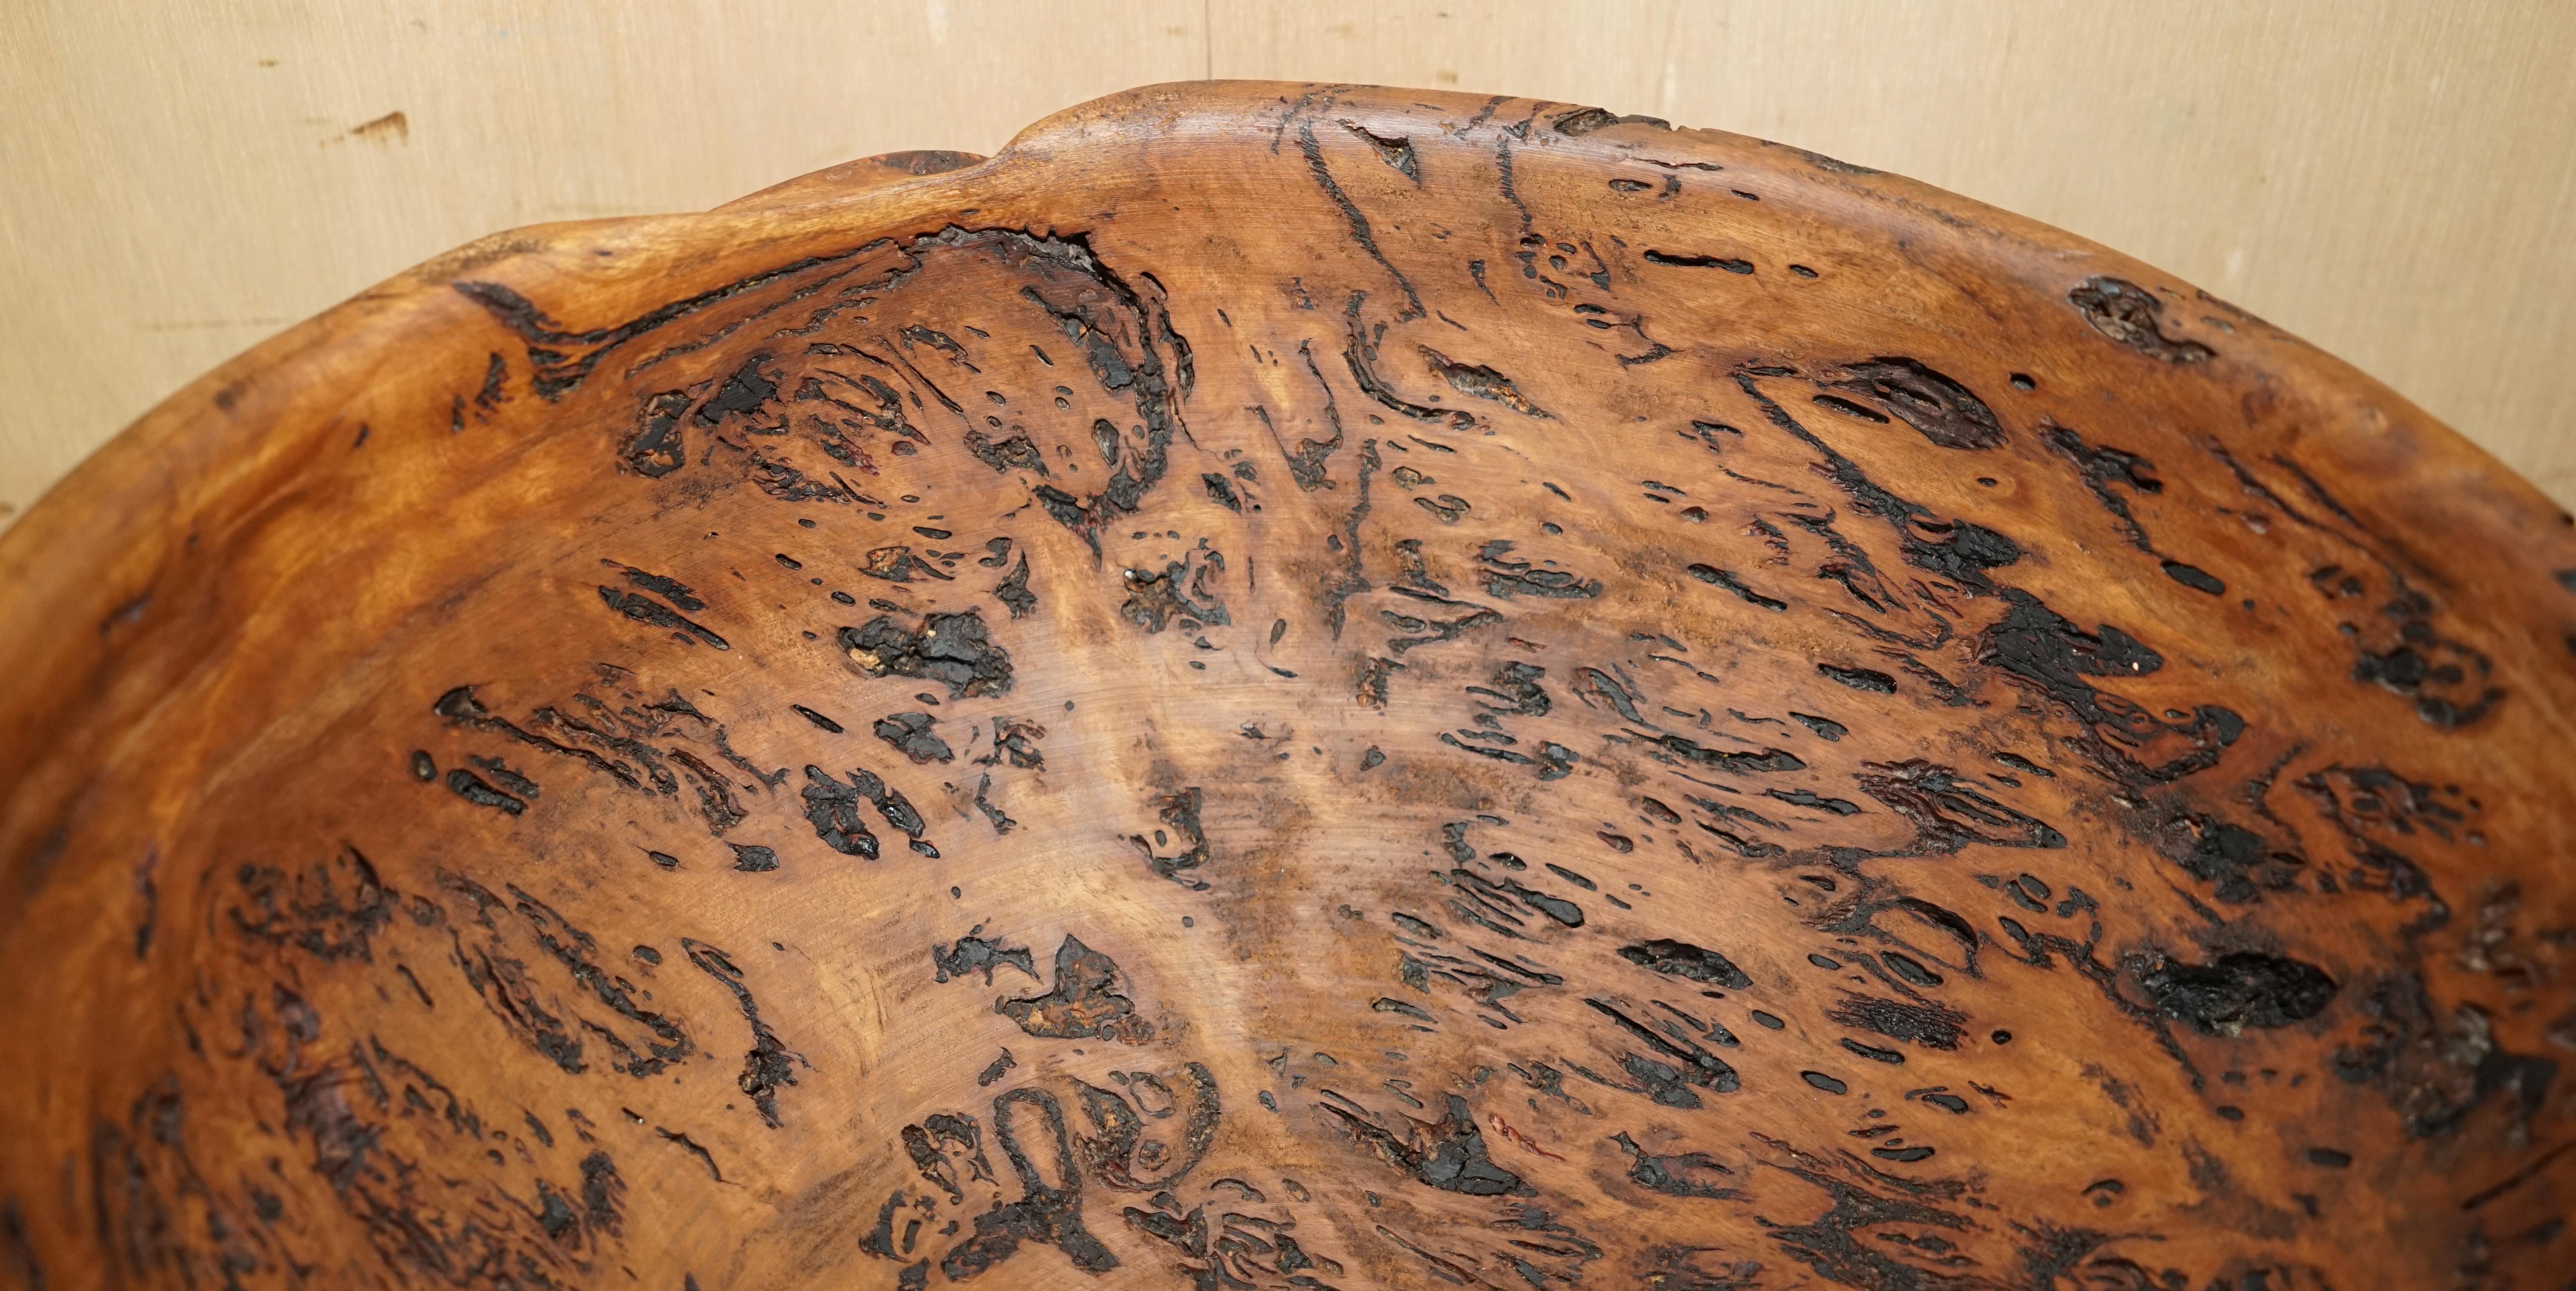 Wood EXTRA LARGE HEAVILY BURRED EUCALYPTUS BOWL SIGNED B MOSS FOR FRUiT ETC MUST SEE For Sale